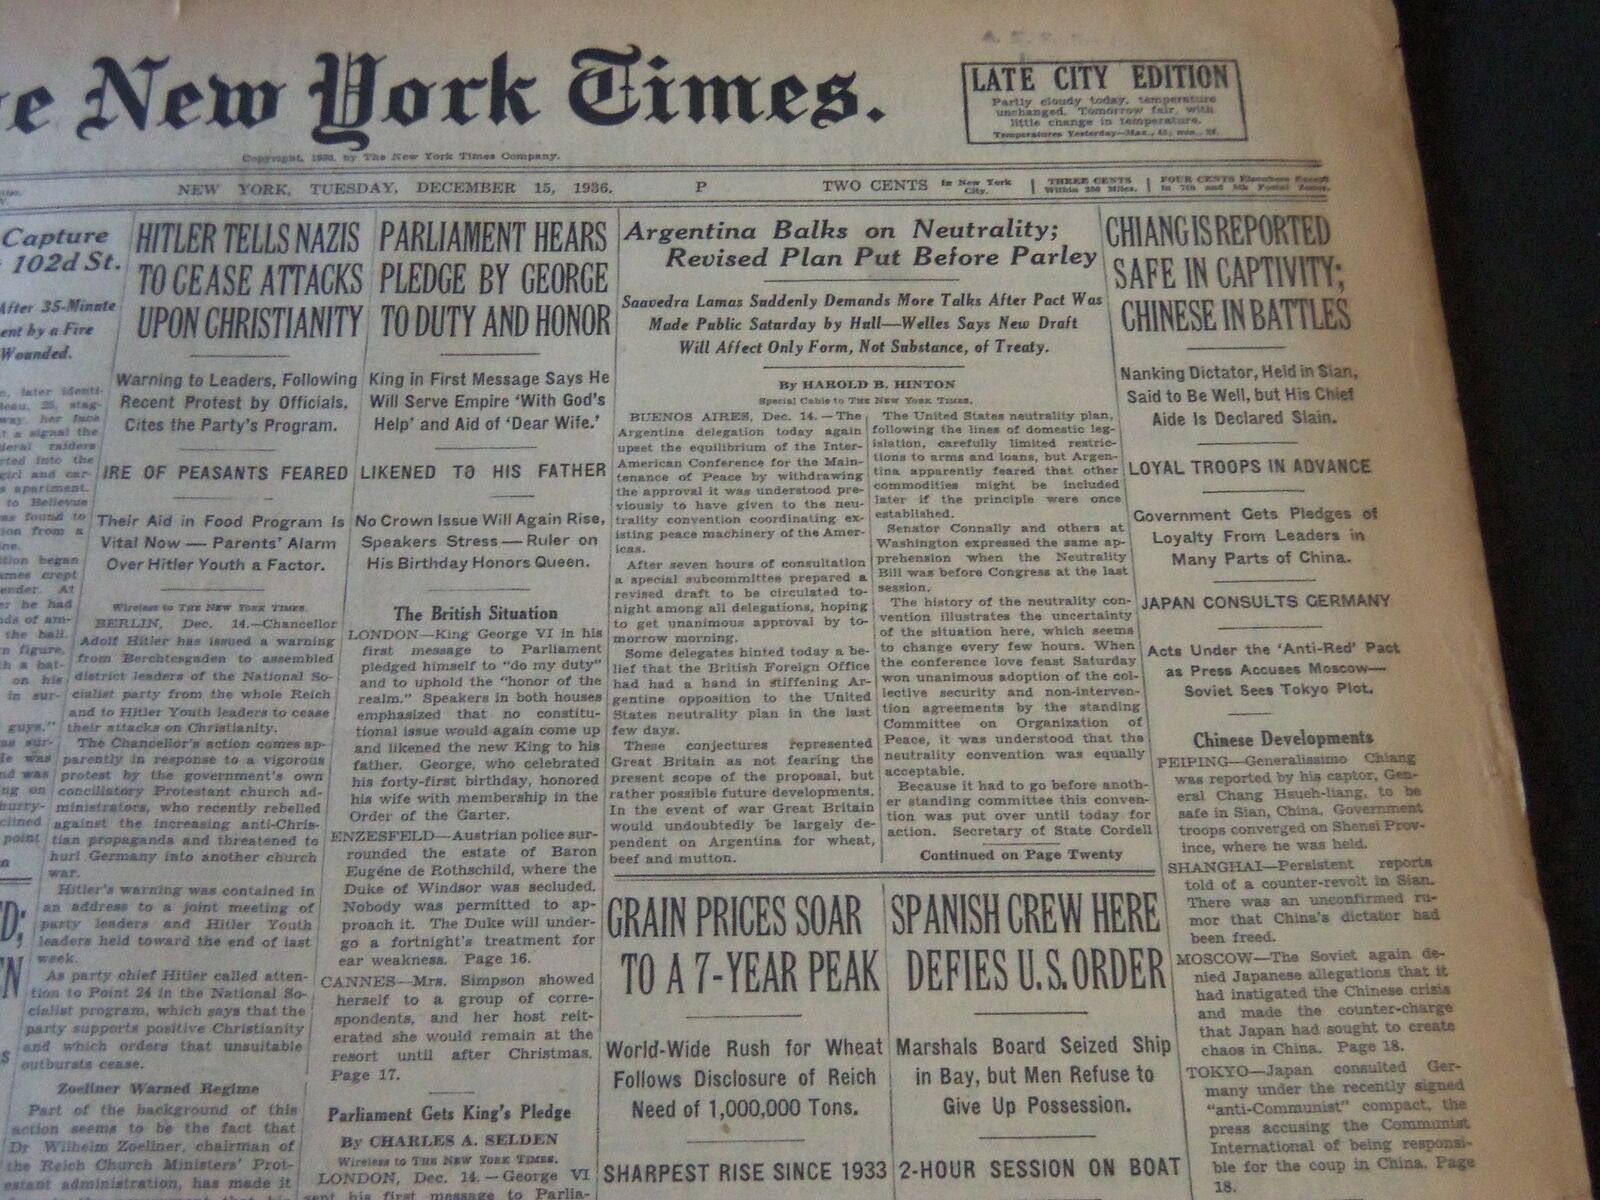 1936 DECEMBER 15 NEW YORK TIMES - CHIANG IS REPORTED SAFE IN CAPTIVITY - NT 6708